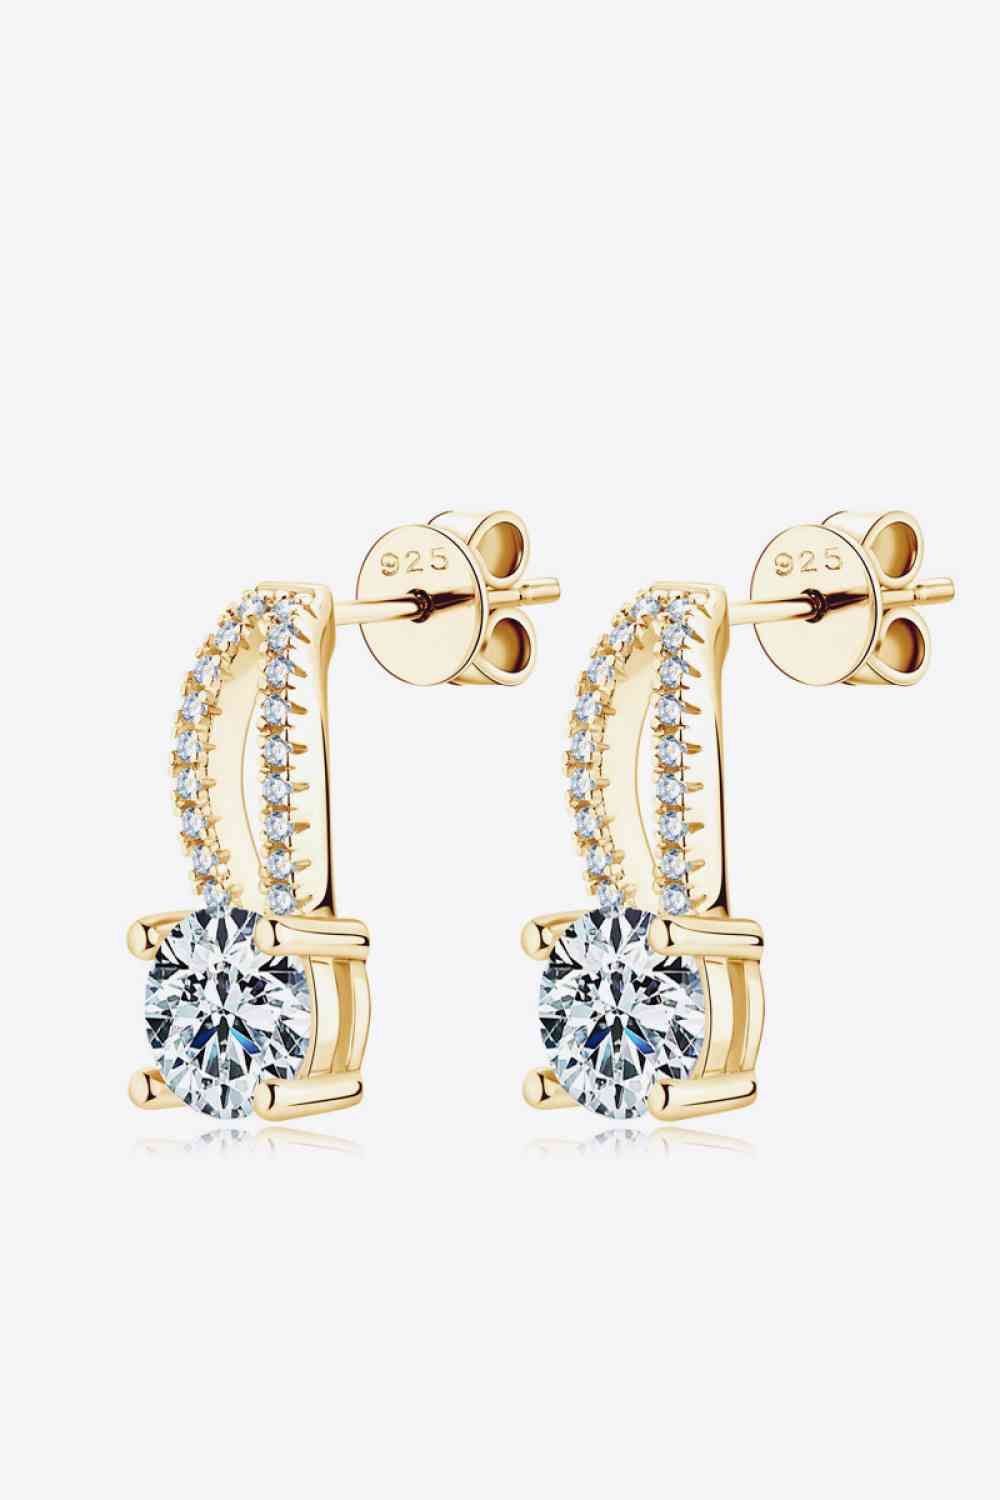 a pair of gold earrings with a cubic stone